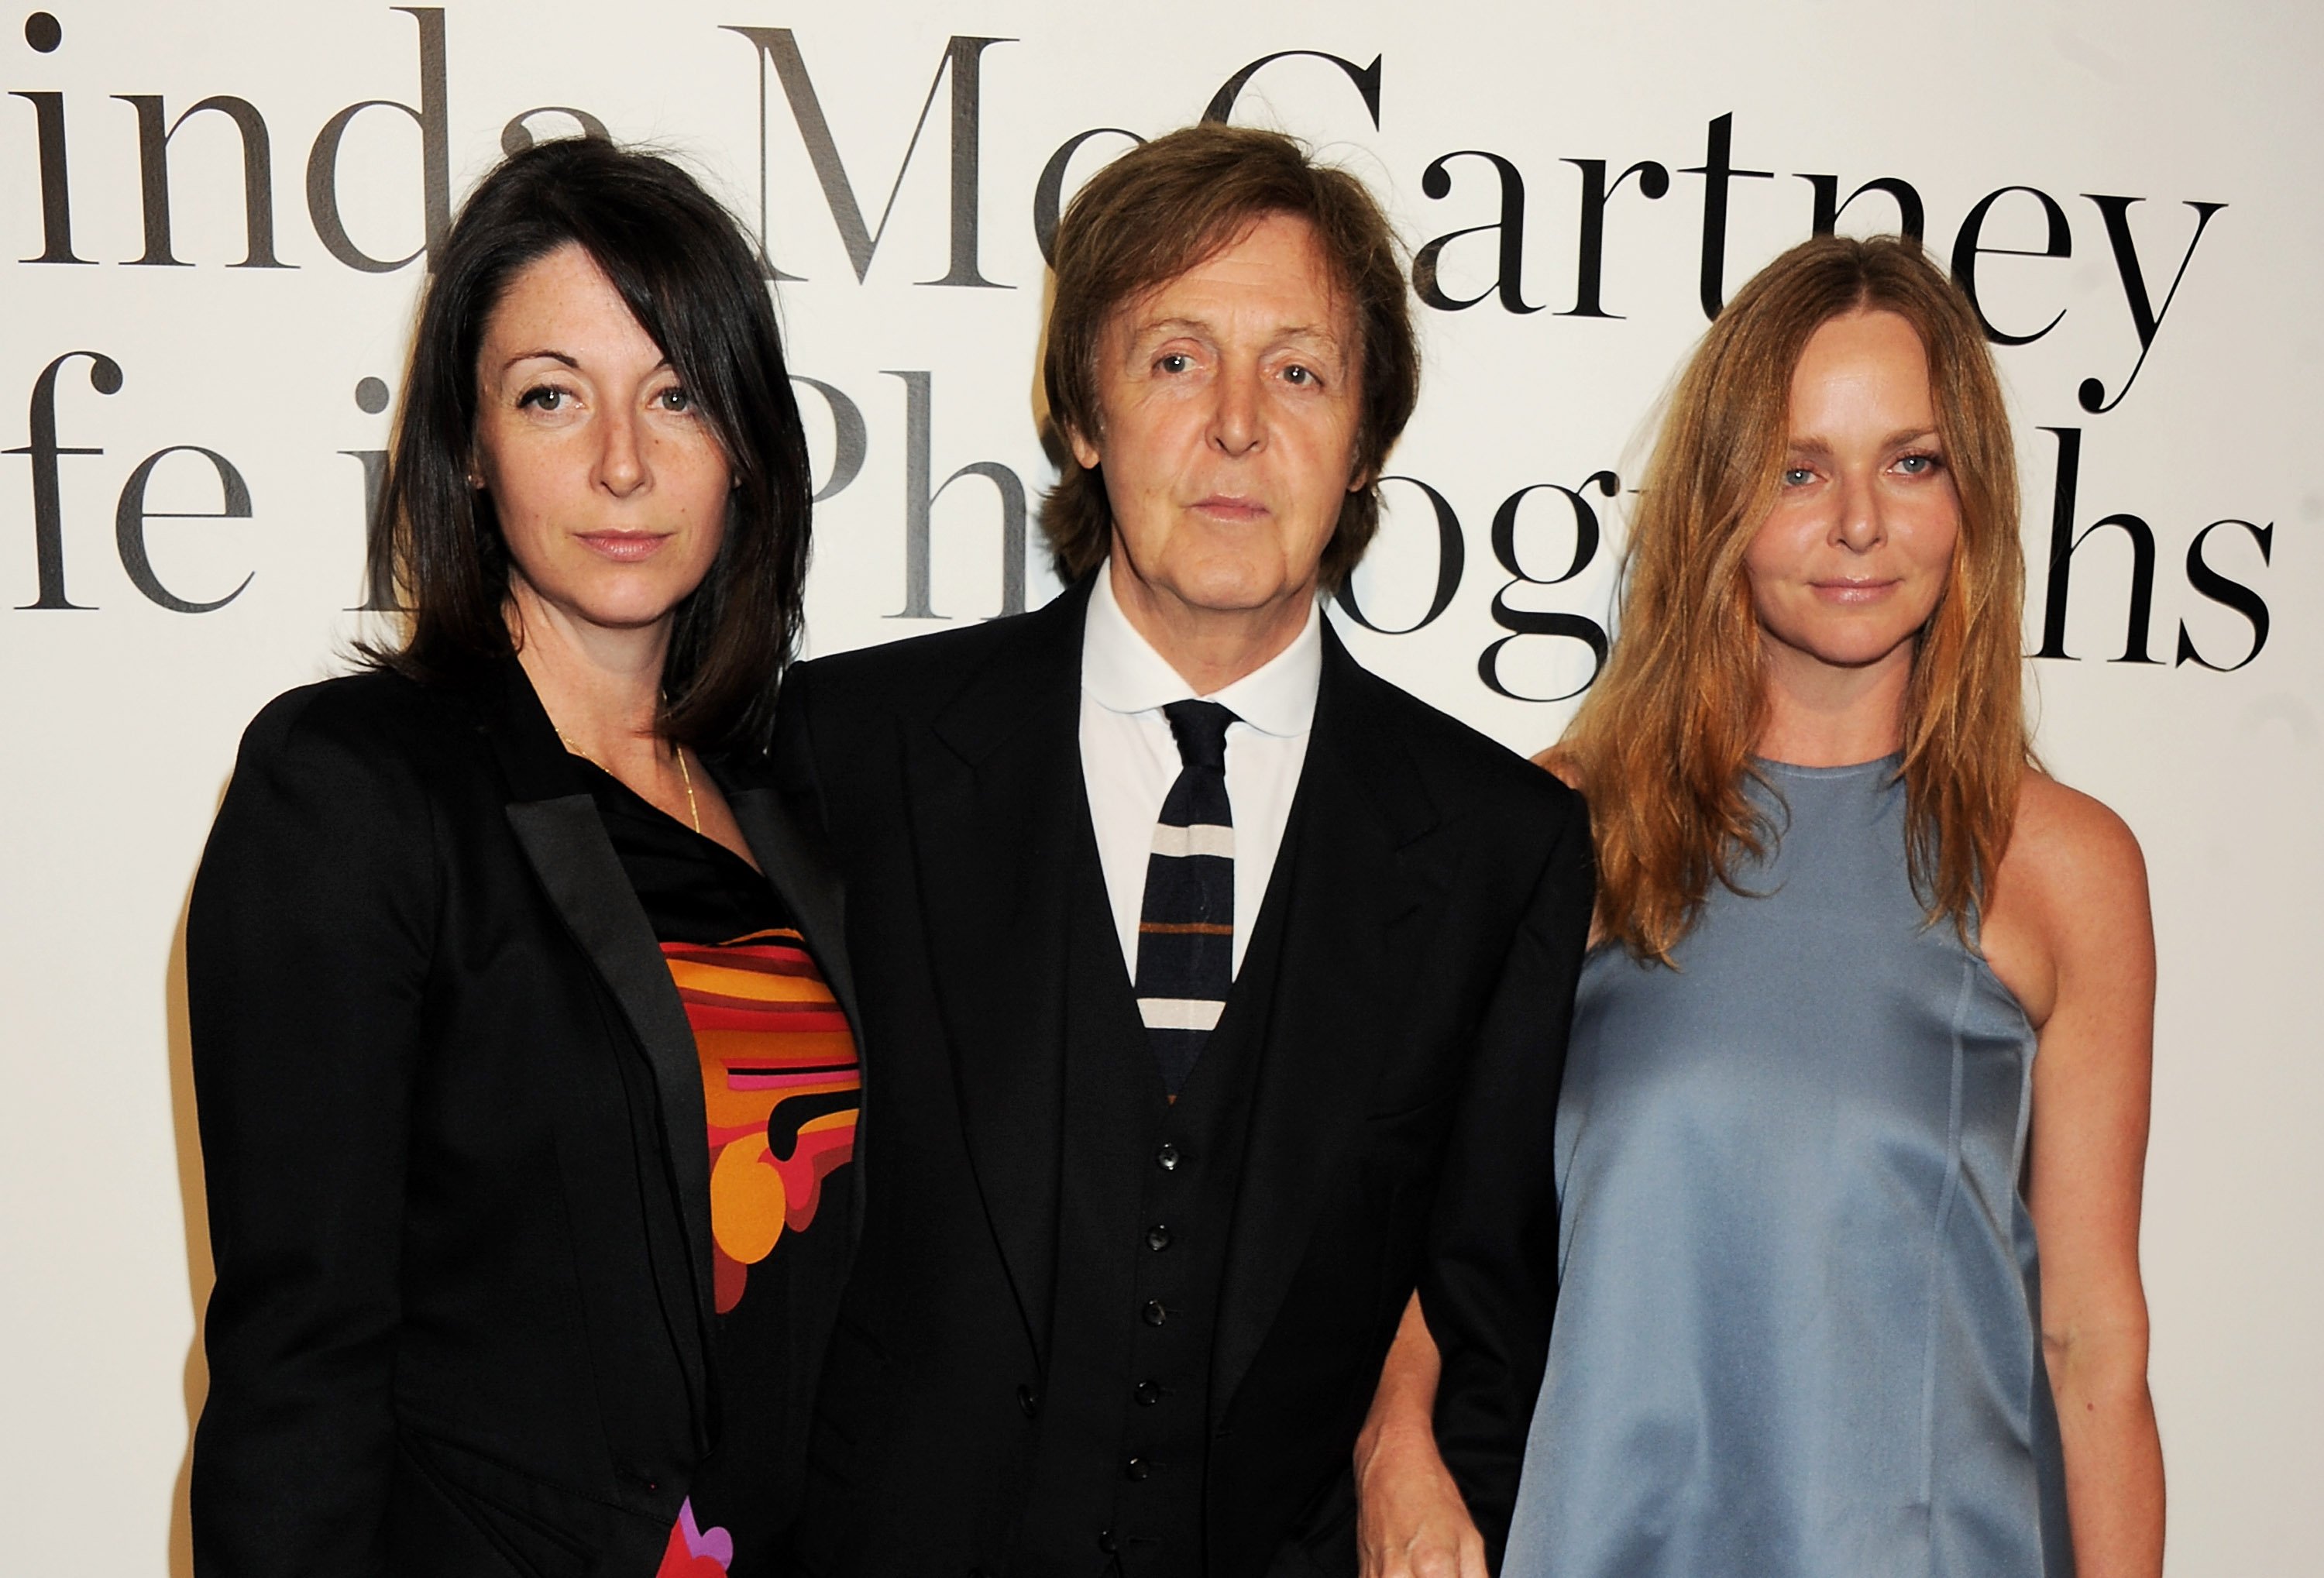 Mary McCartney, Paul McCartney, and Stella McCartney attend a private viewing of "A Life in Photographs: An Exhibition of Photography by Linda McCartney" at Phillips de Pury And Company on June 6, 2011, in London, England. | Source: Getty Images